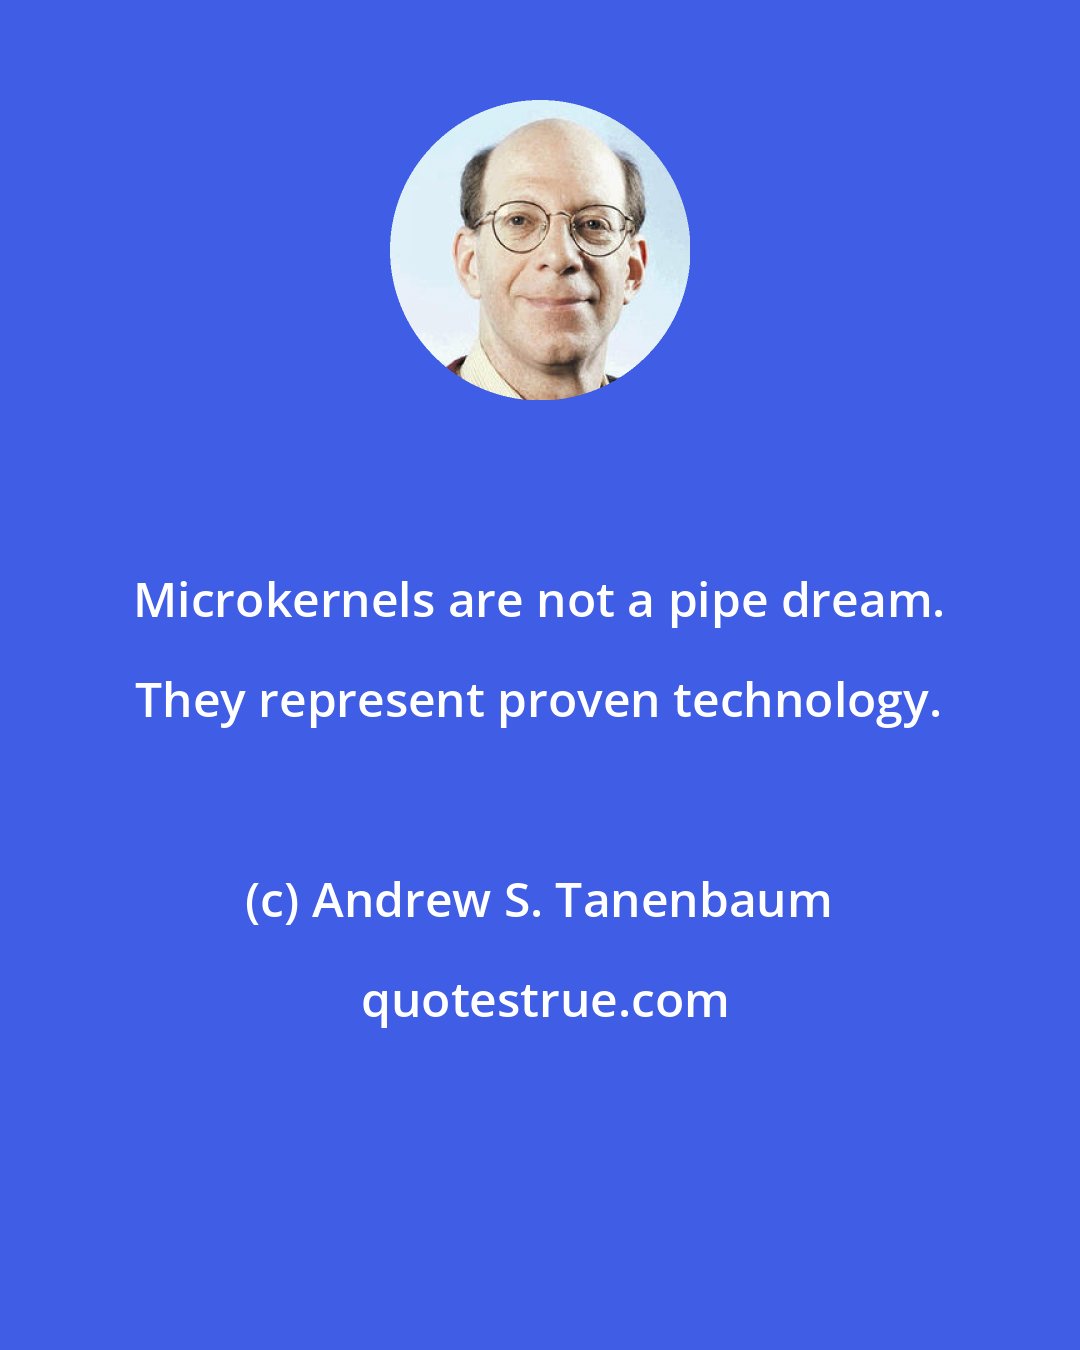 Andrew S. Tanenbaum: Microkernels are not a pipe dream. They represent proven technology.